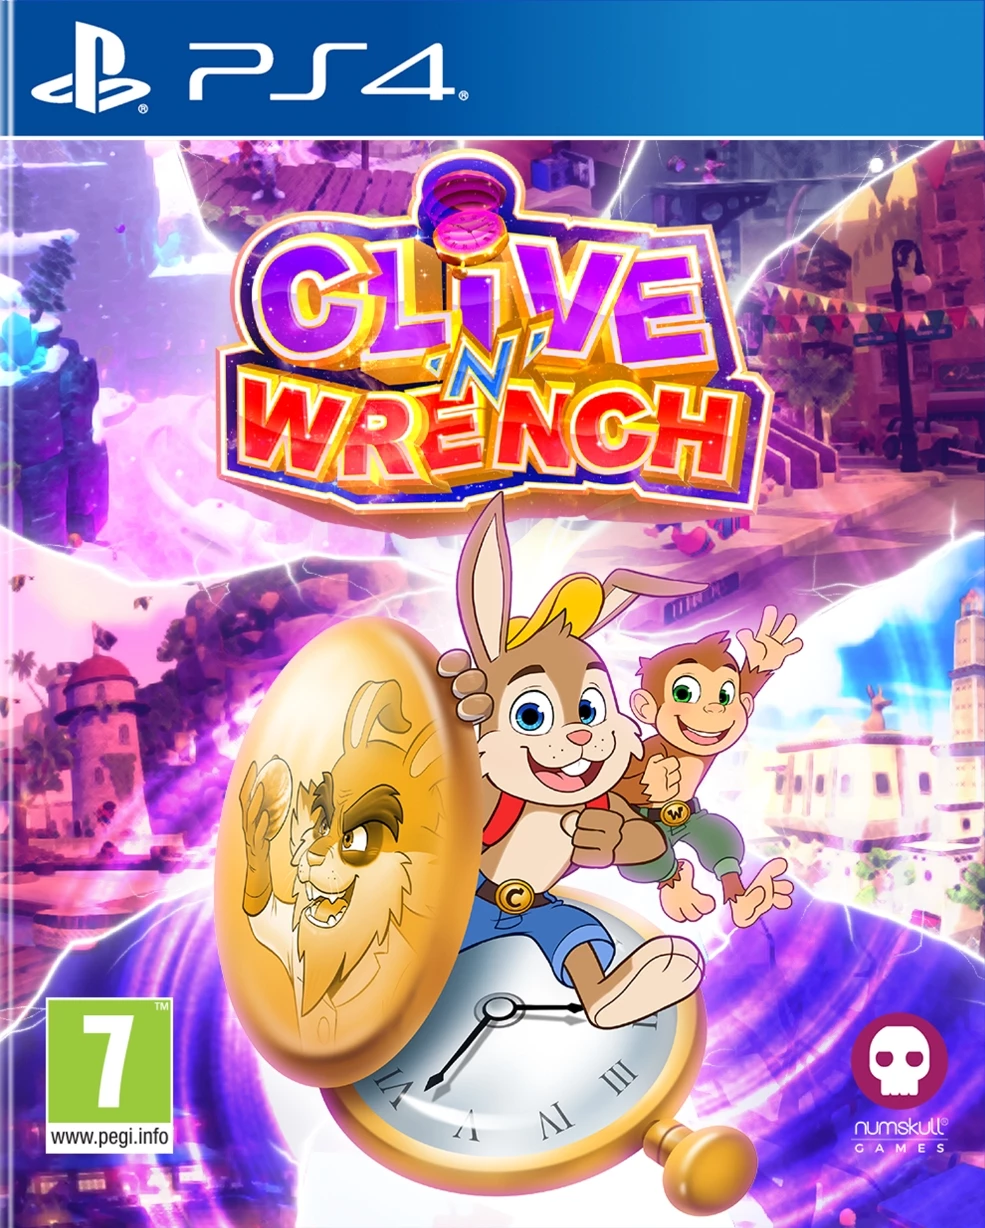 Clive 'n' Wrench (PS4), Numskull Games